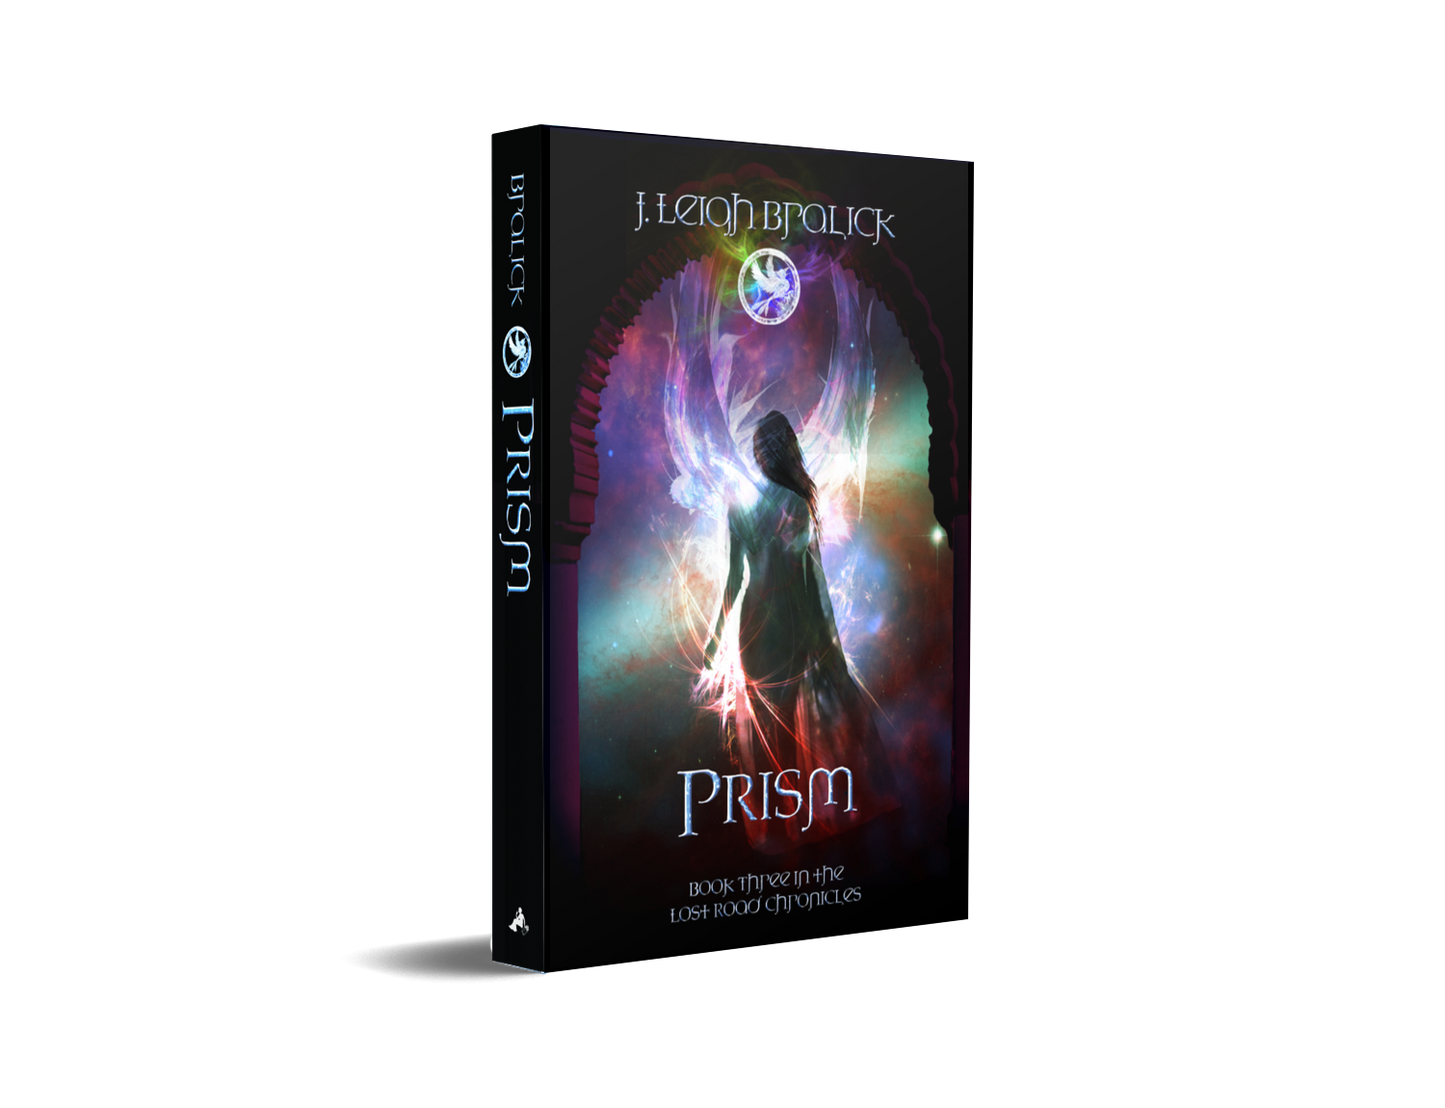 Prism (Lost Road Chronicles #3) - Paperback